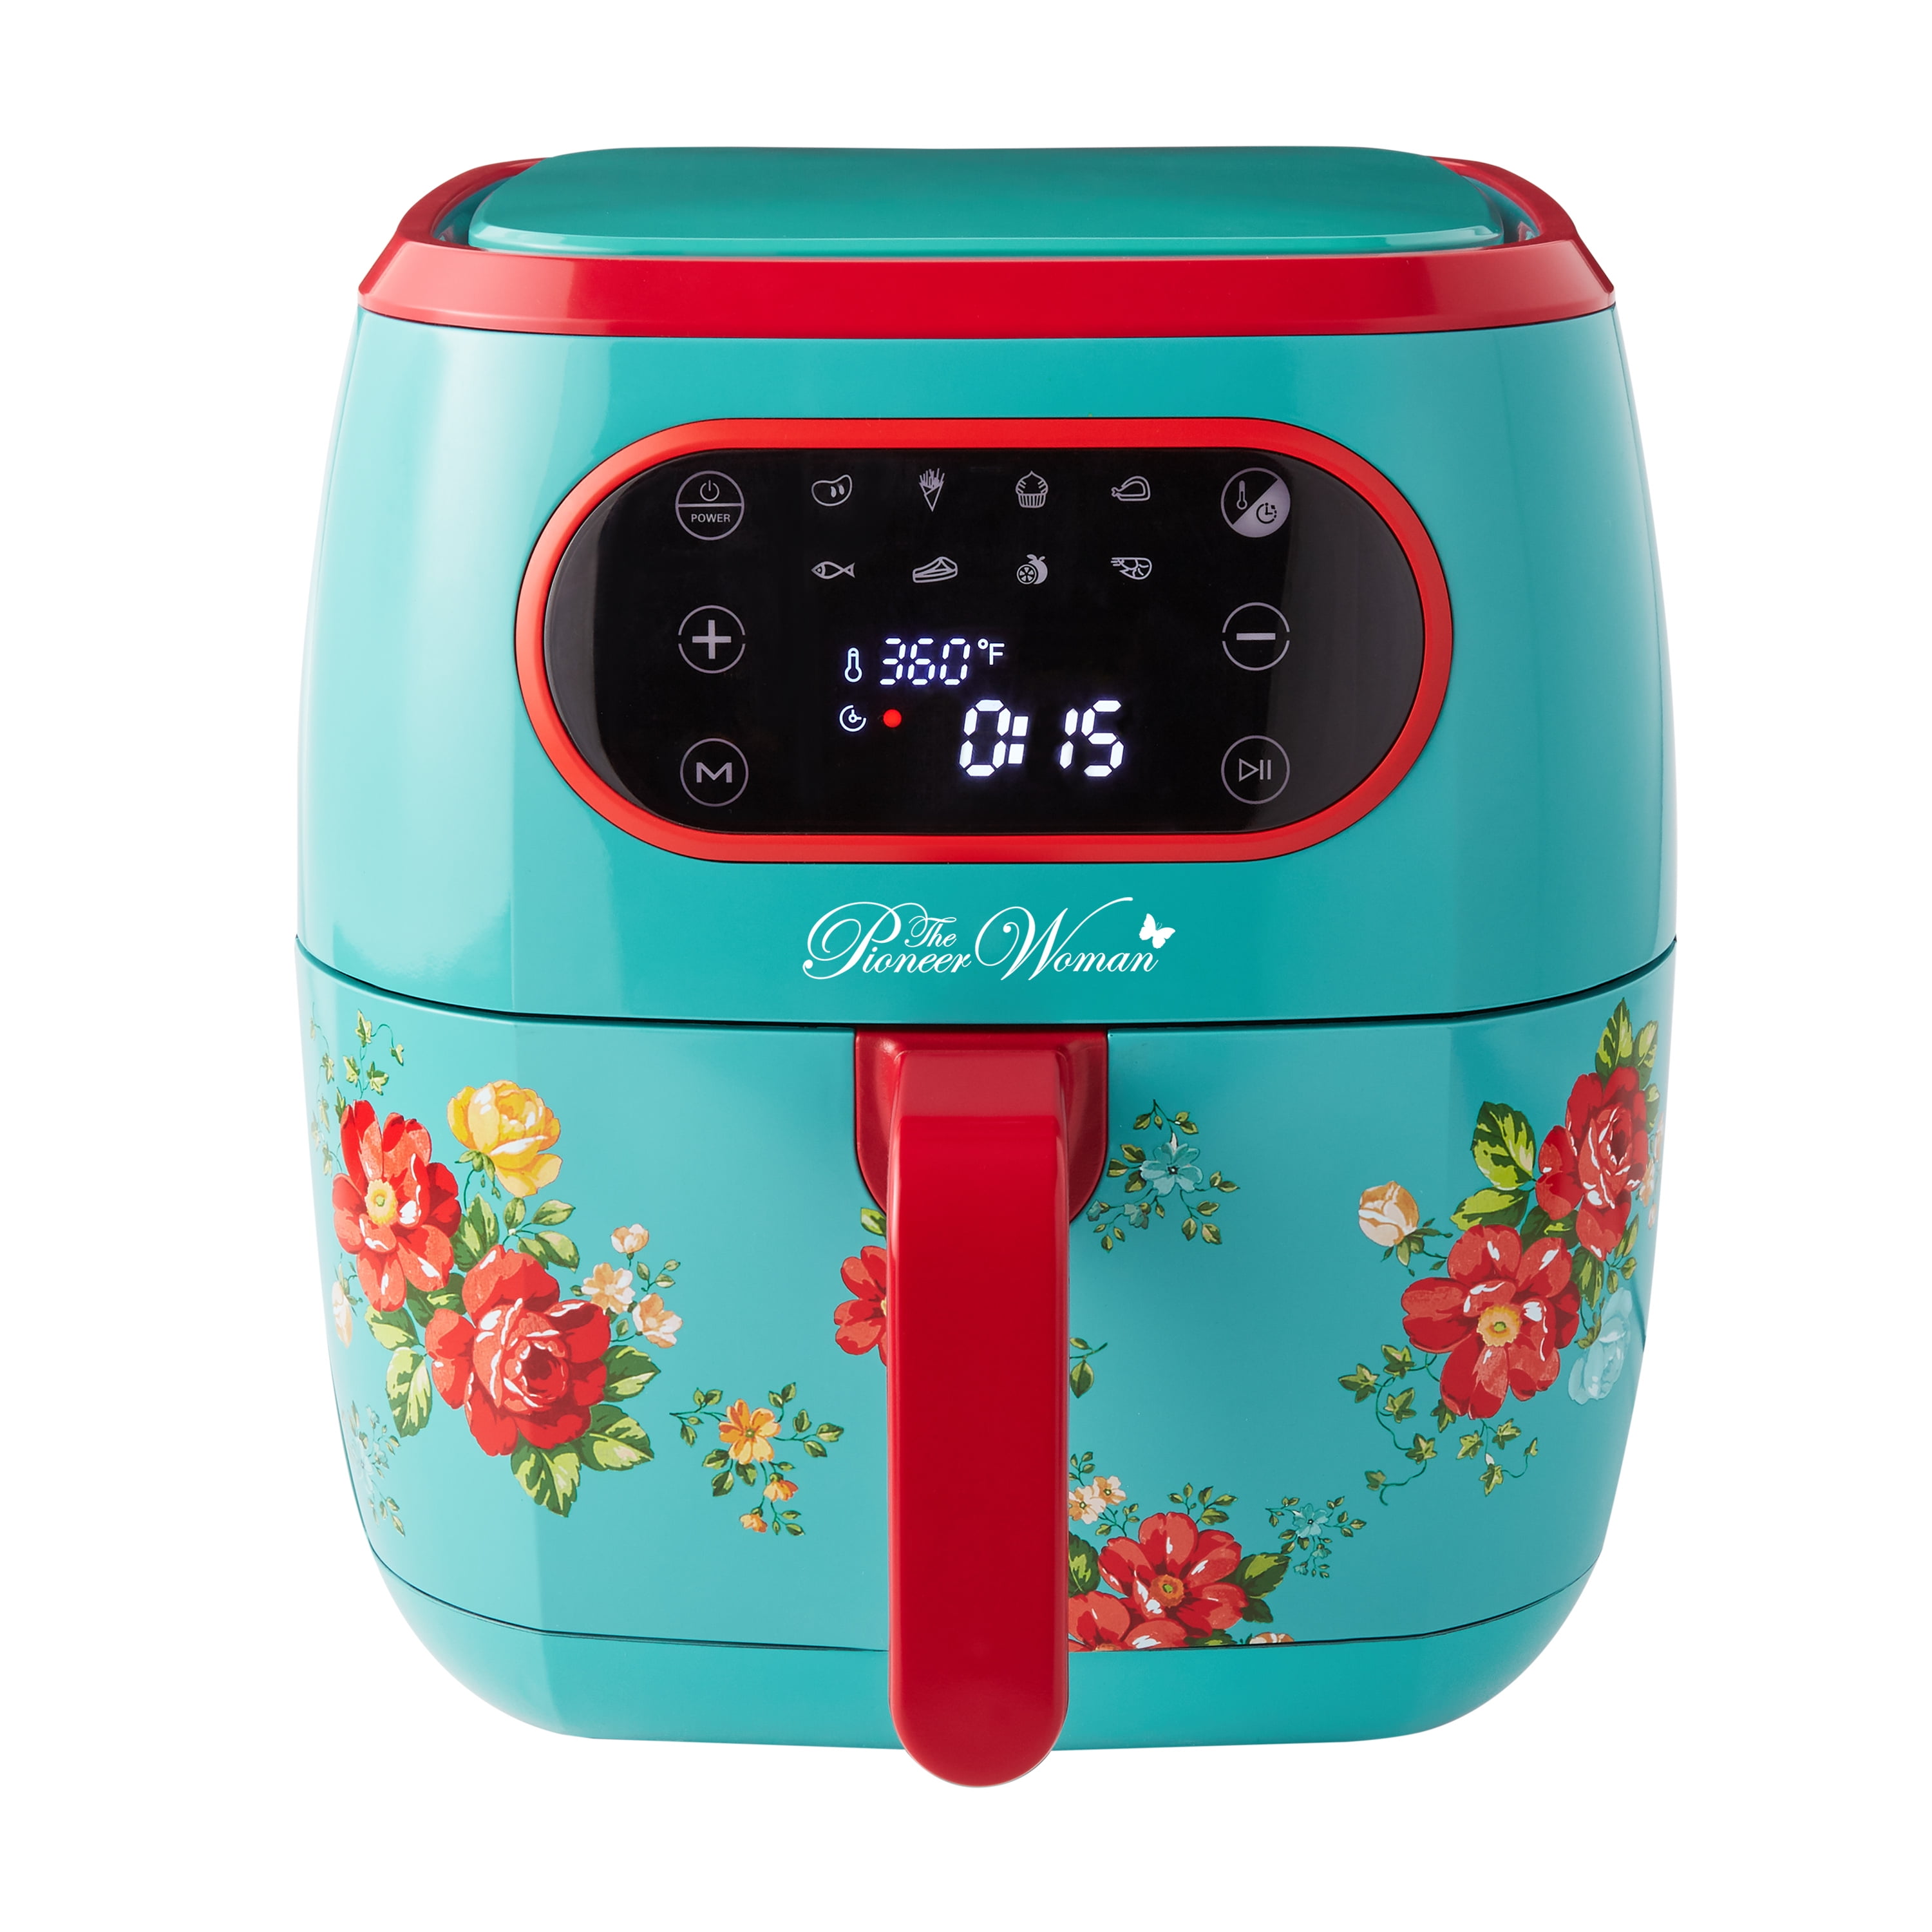 The Pioneer Woman Vintage Floral 6.3 Quart Air Fryer with 13.46 LED Screen